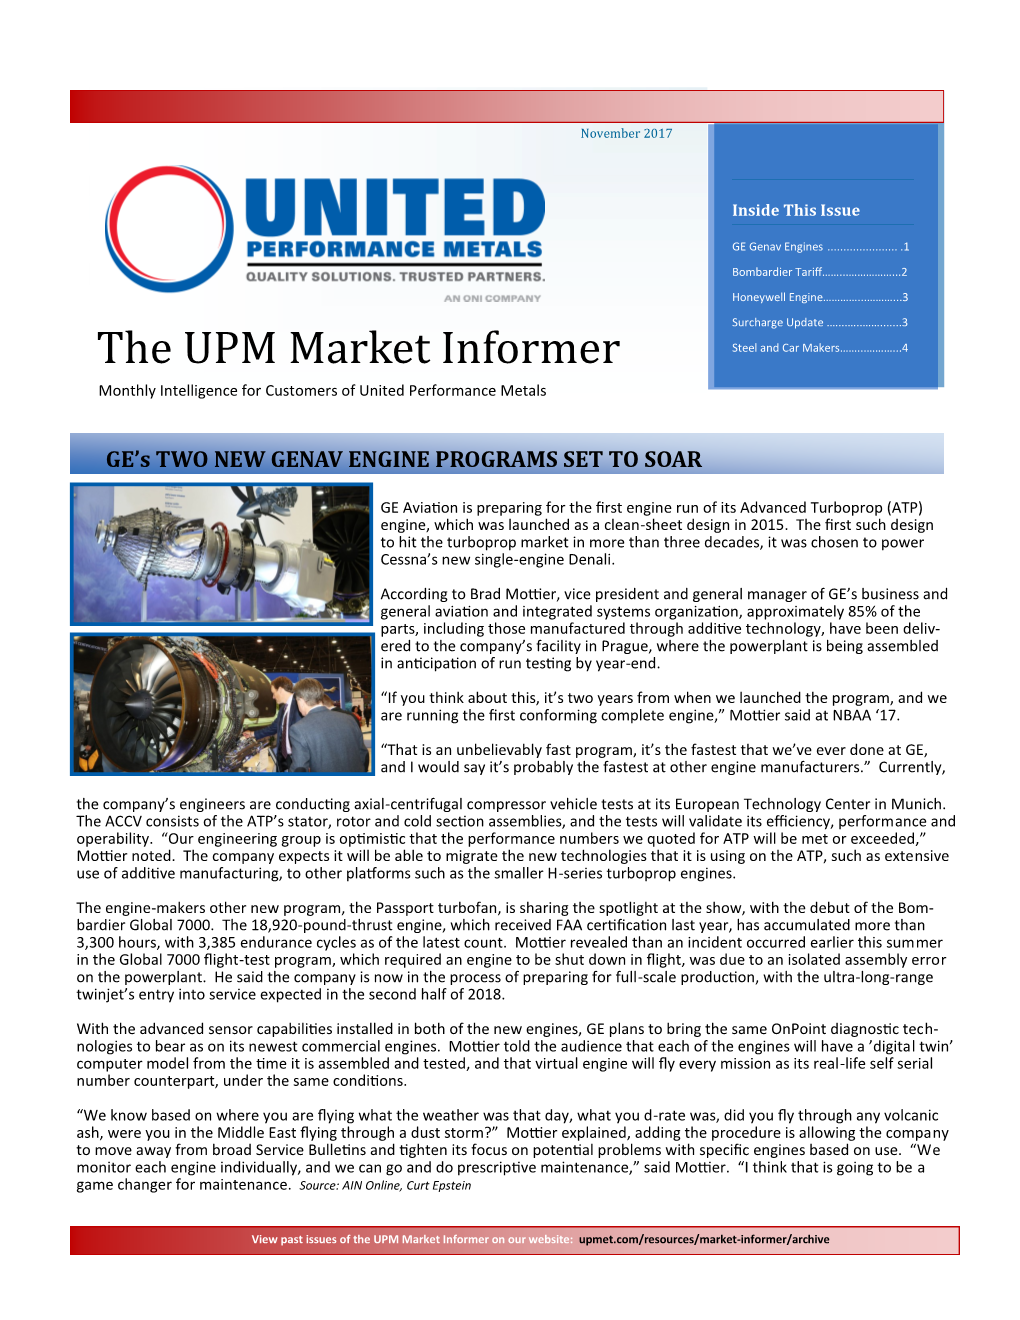 The UPM Market Informer Steel and Car Makers……...………...4 Monthly Intelligence for Customers of United Performance Metals